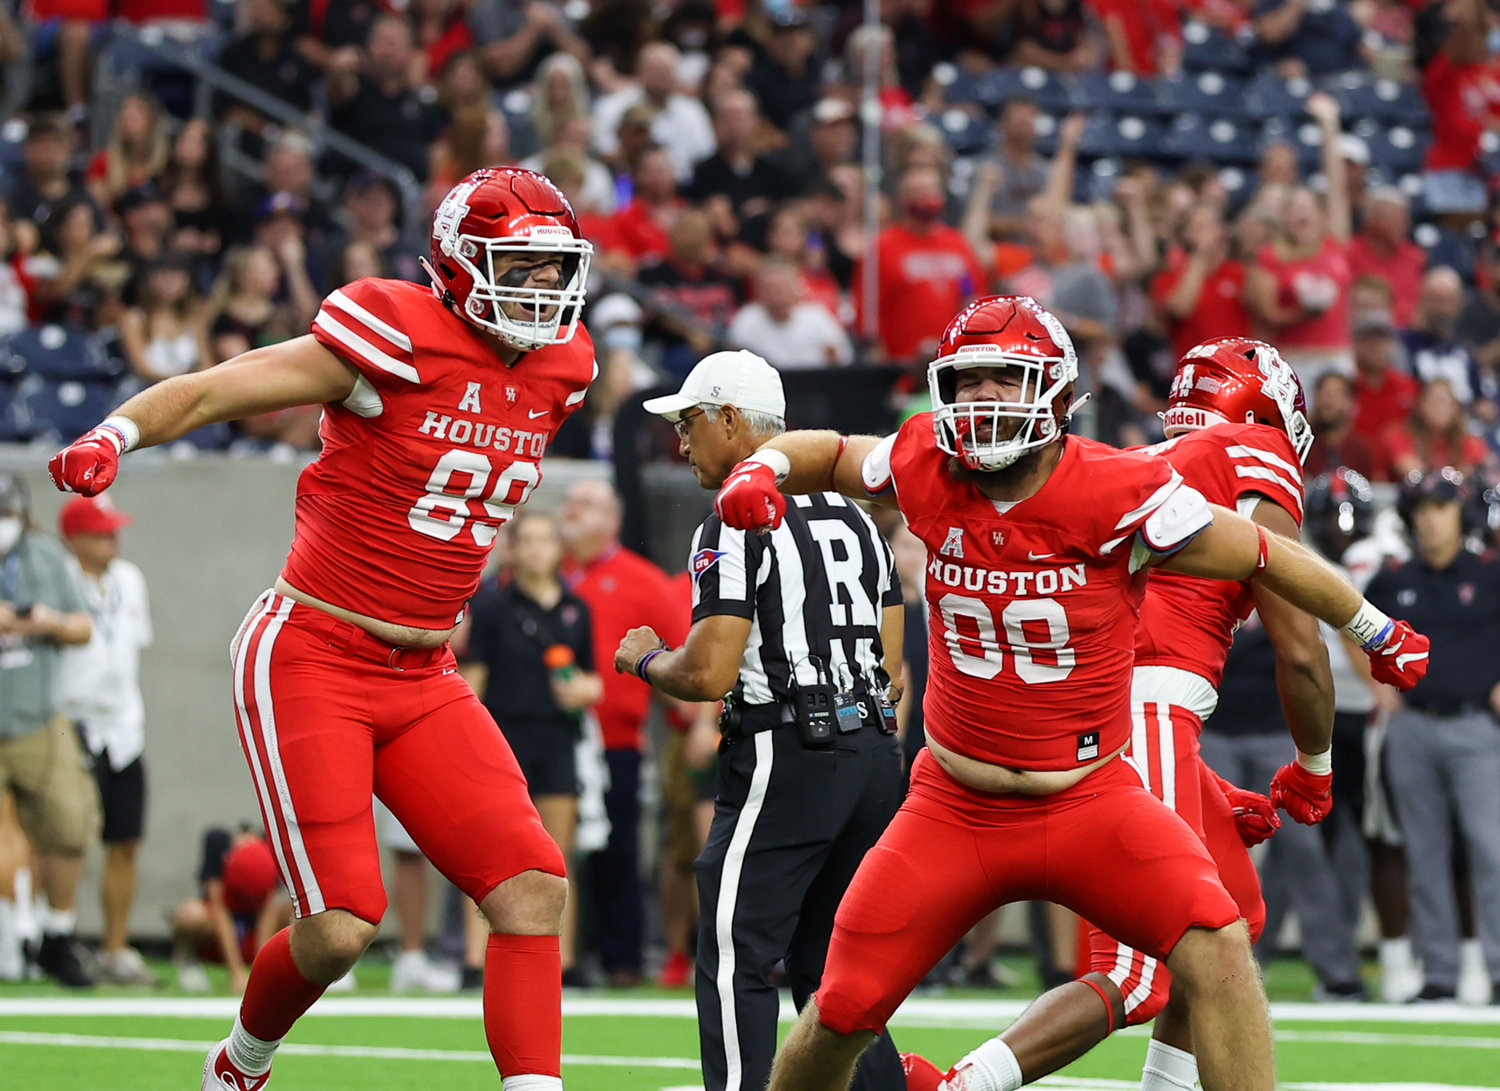 Houston Cougars tight end Parker Eichenberger (89) and tight end Shane Creamer (88) celebrate a play during an NCAA football game between Houston and Texas Tech on September 4, 2021 in Houston, Texas.